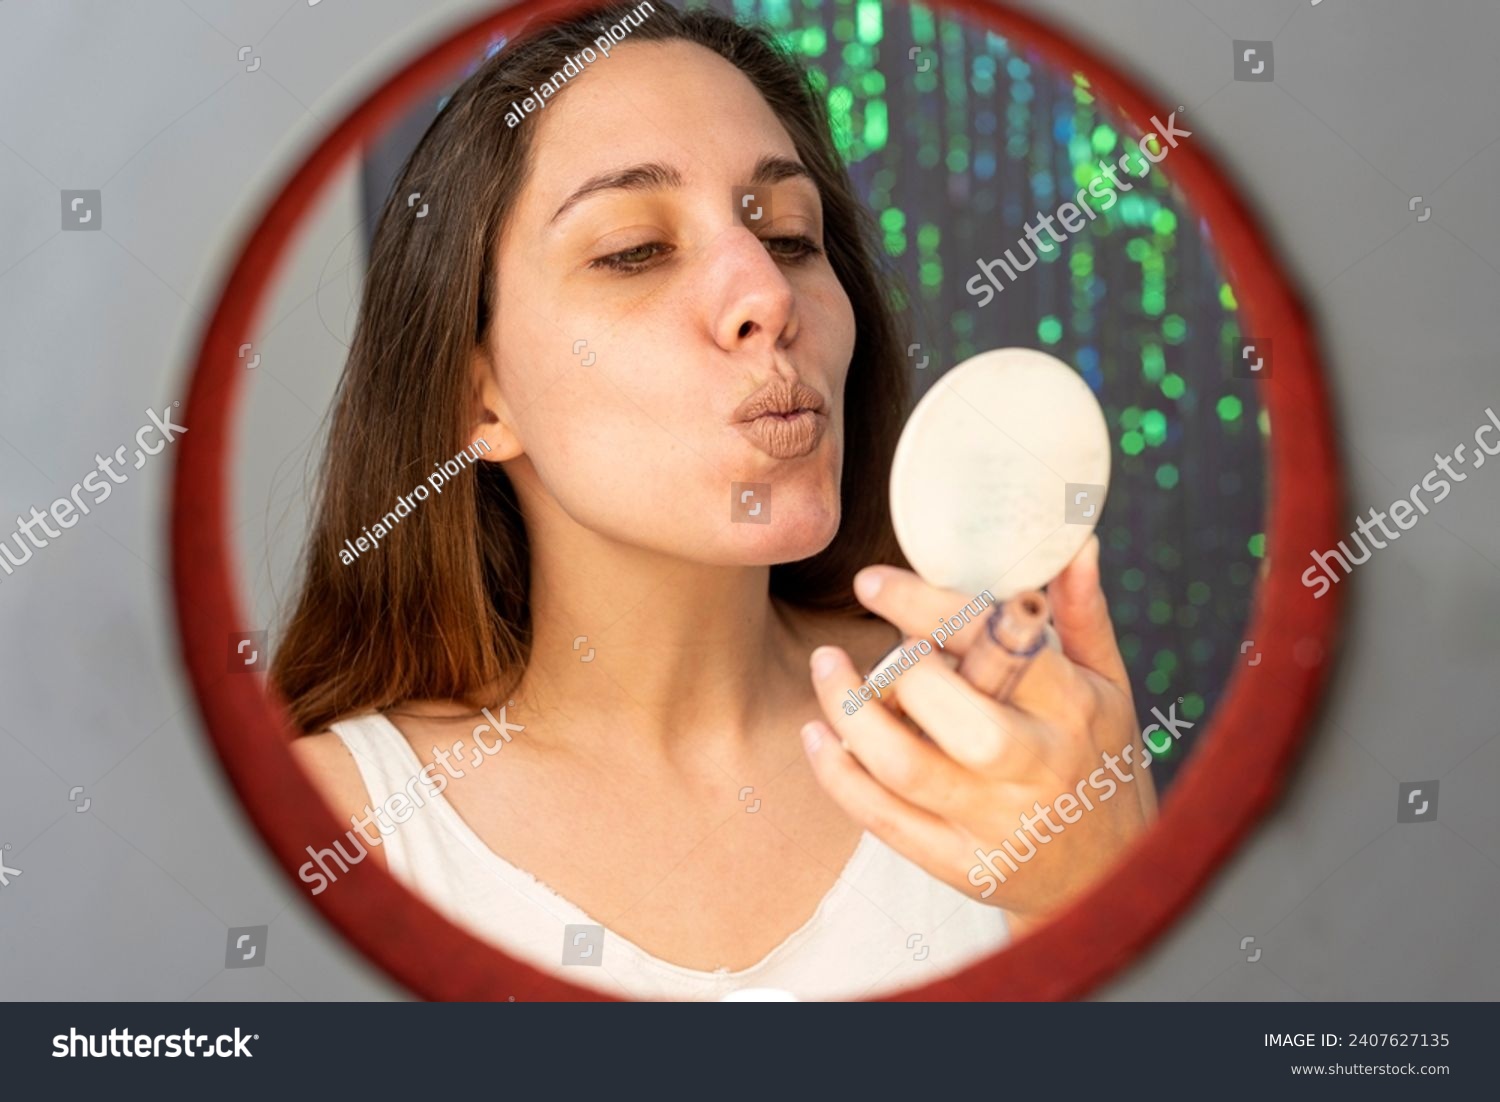 young woman in beauty and makeup center putting on makeup in front of a mirror and cell phone with a ring of light happy painting her lips and cheekbo #2407627135